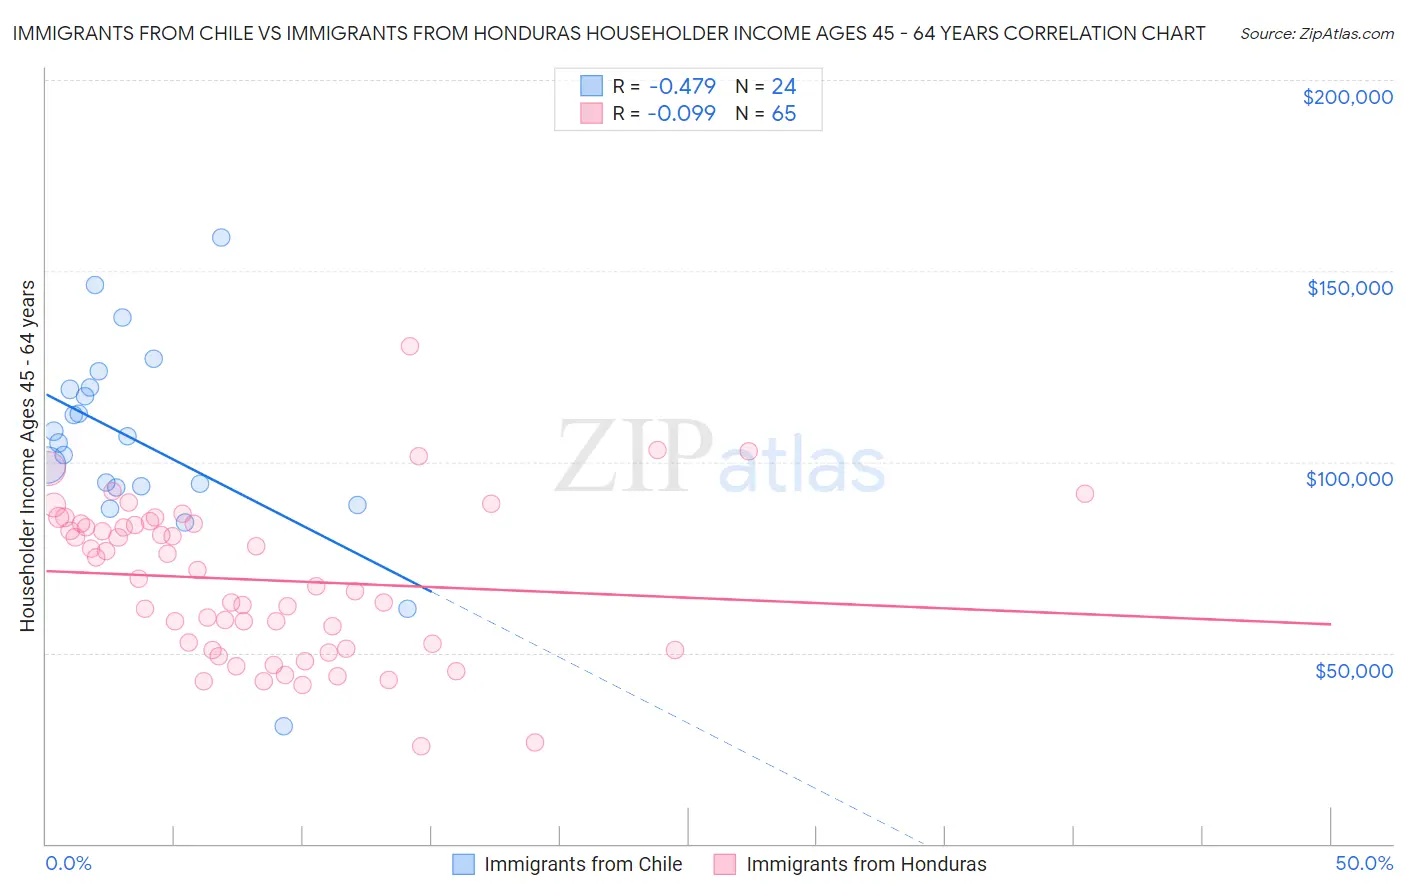 Immigrants from Chile vs Immigrants from Honduras Householder Income Ages 45 - 64 years